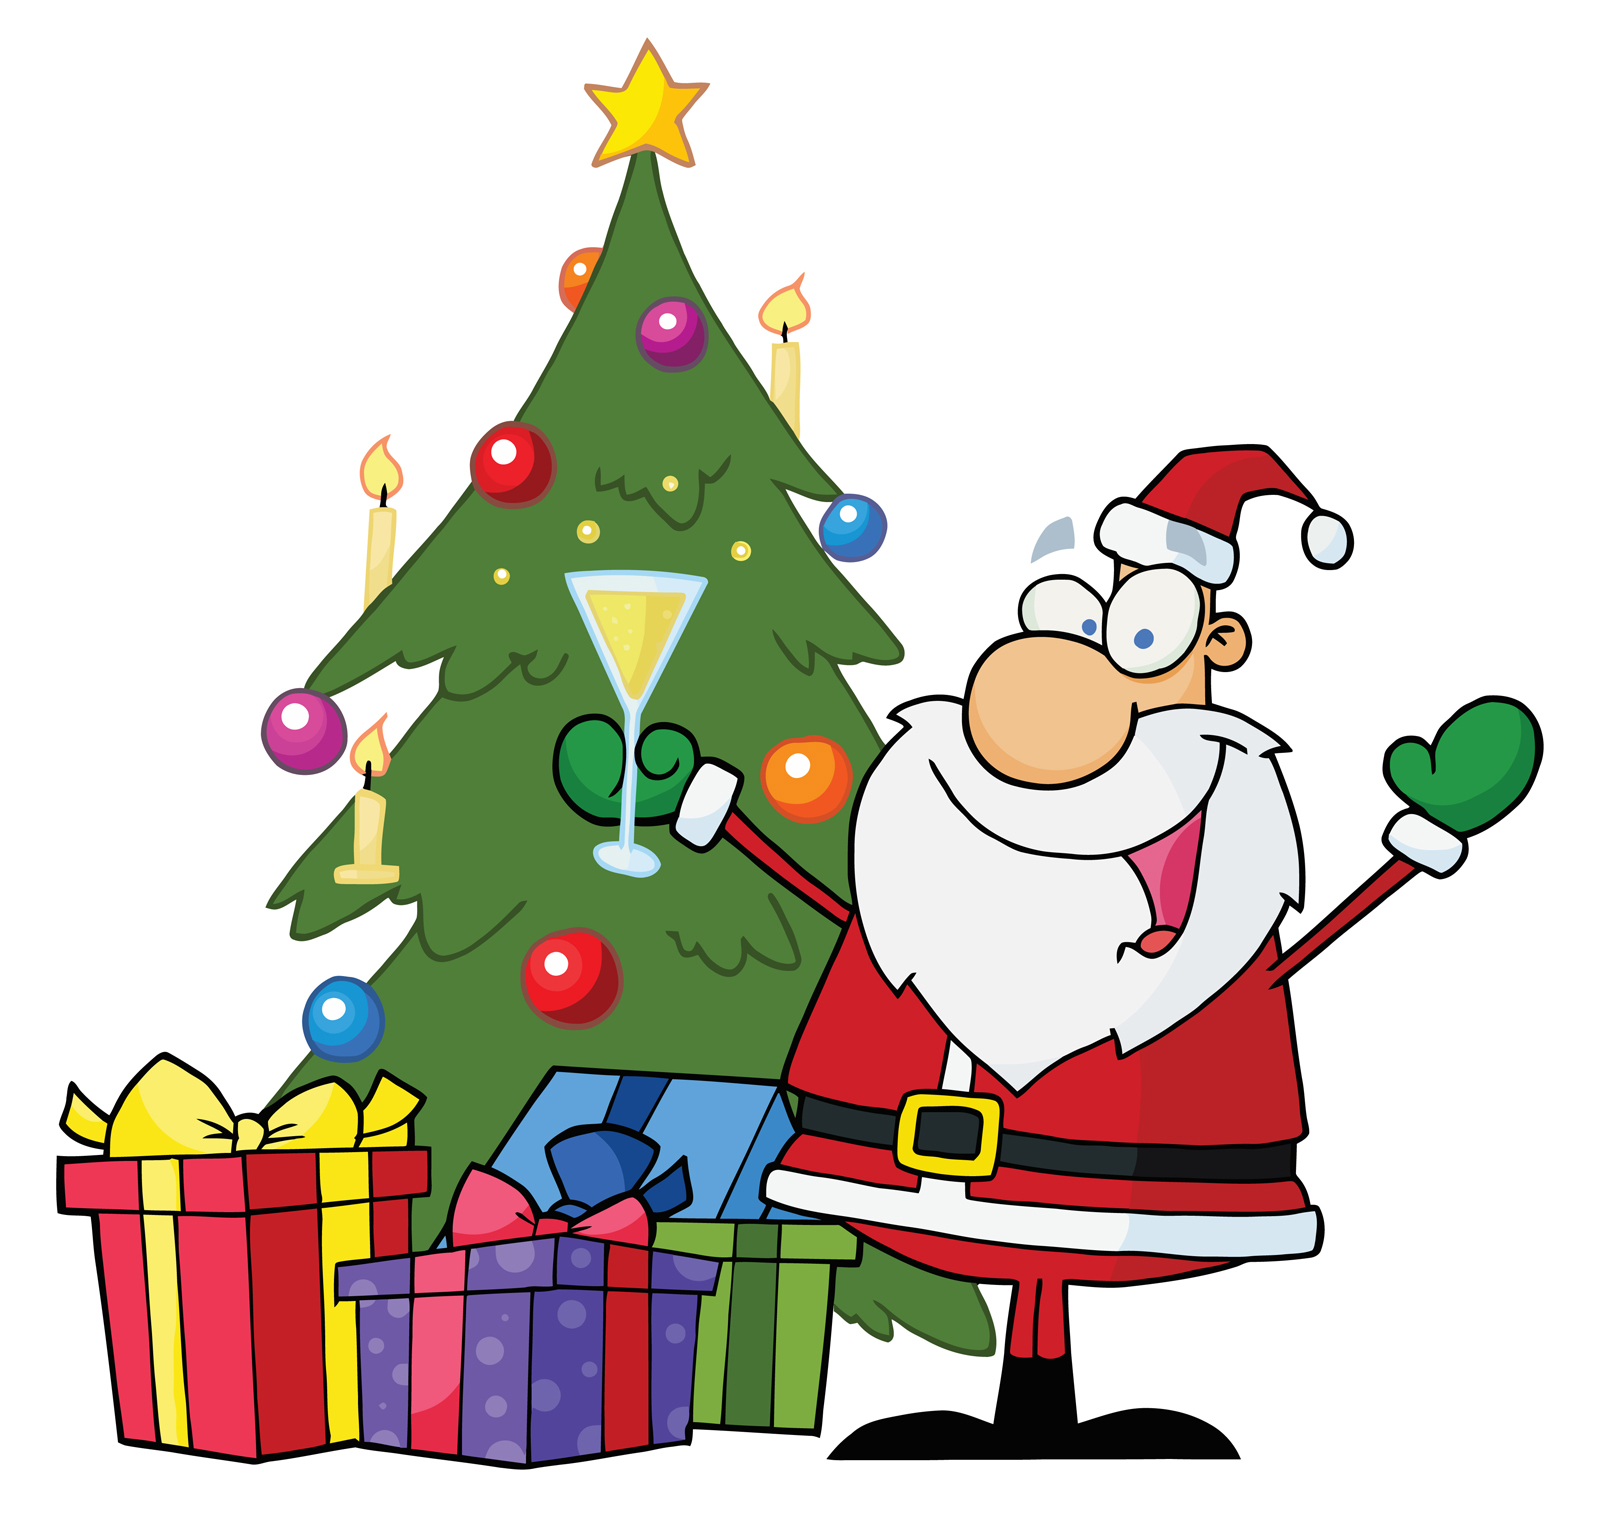 Xmas Stuff For > Animated Christmas Tree With Presents